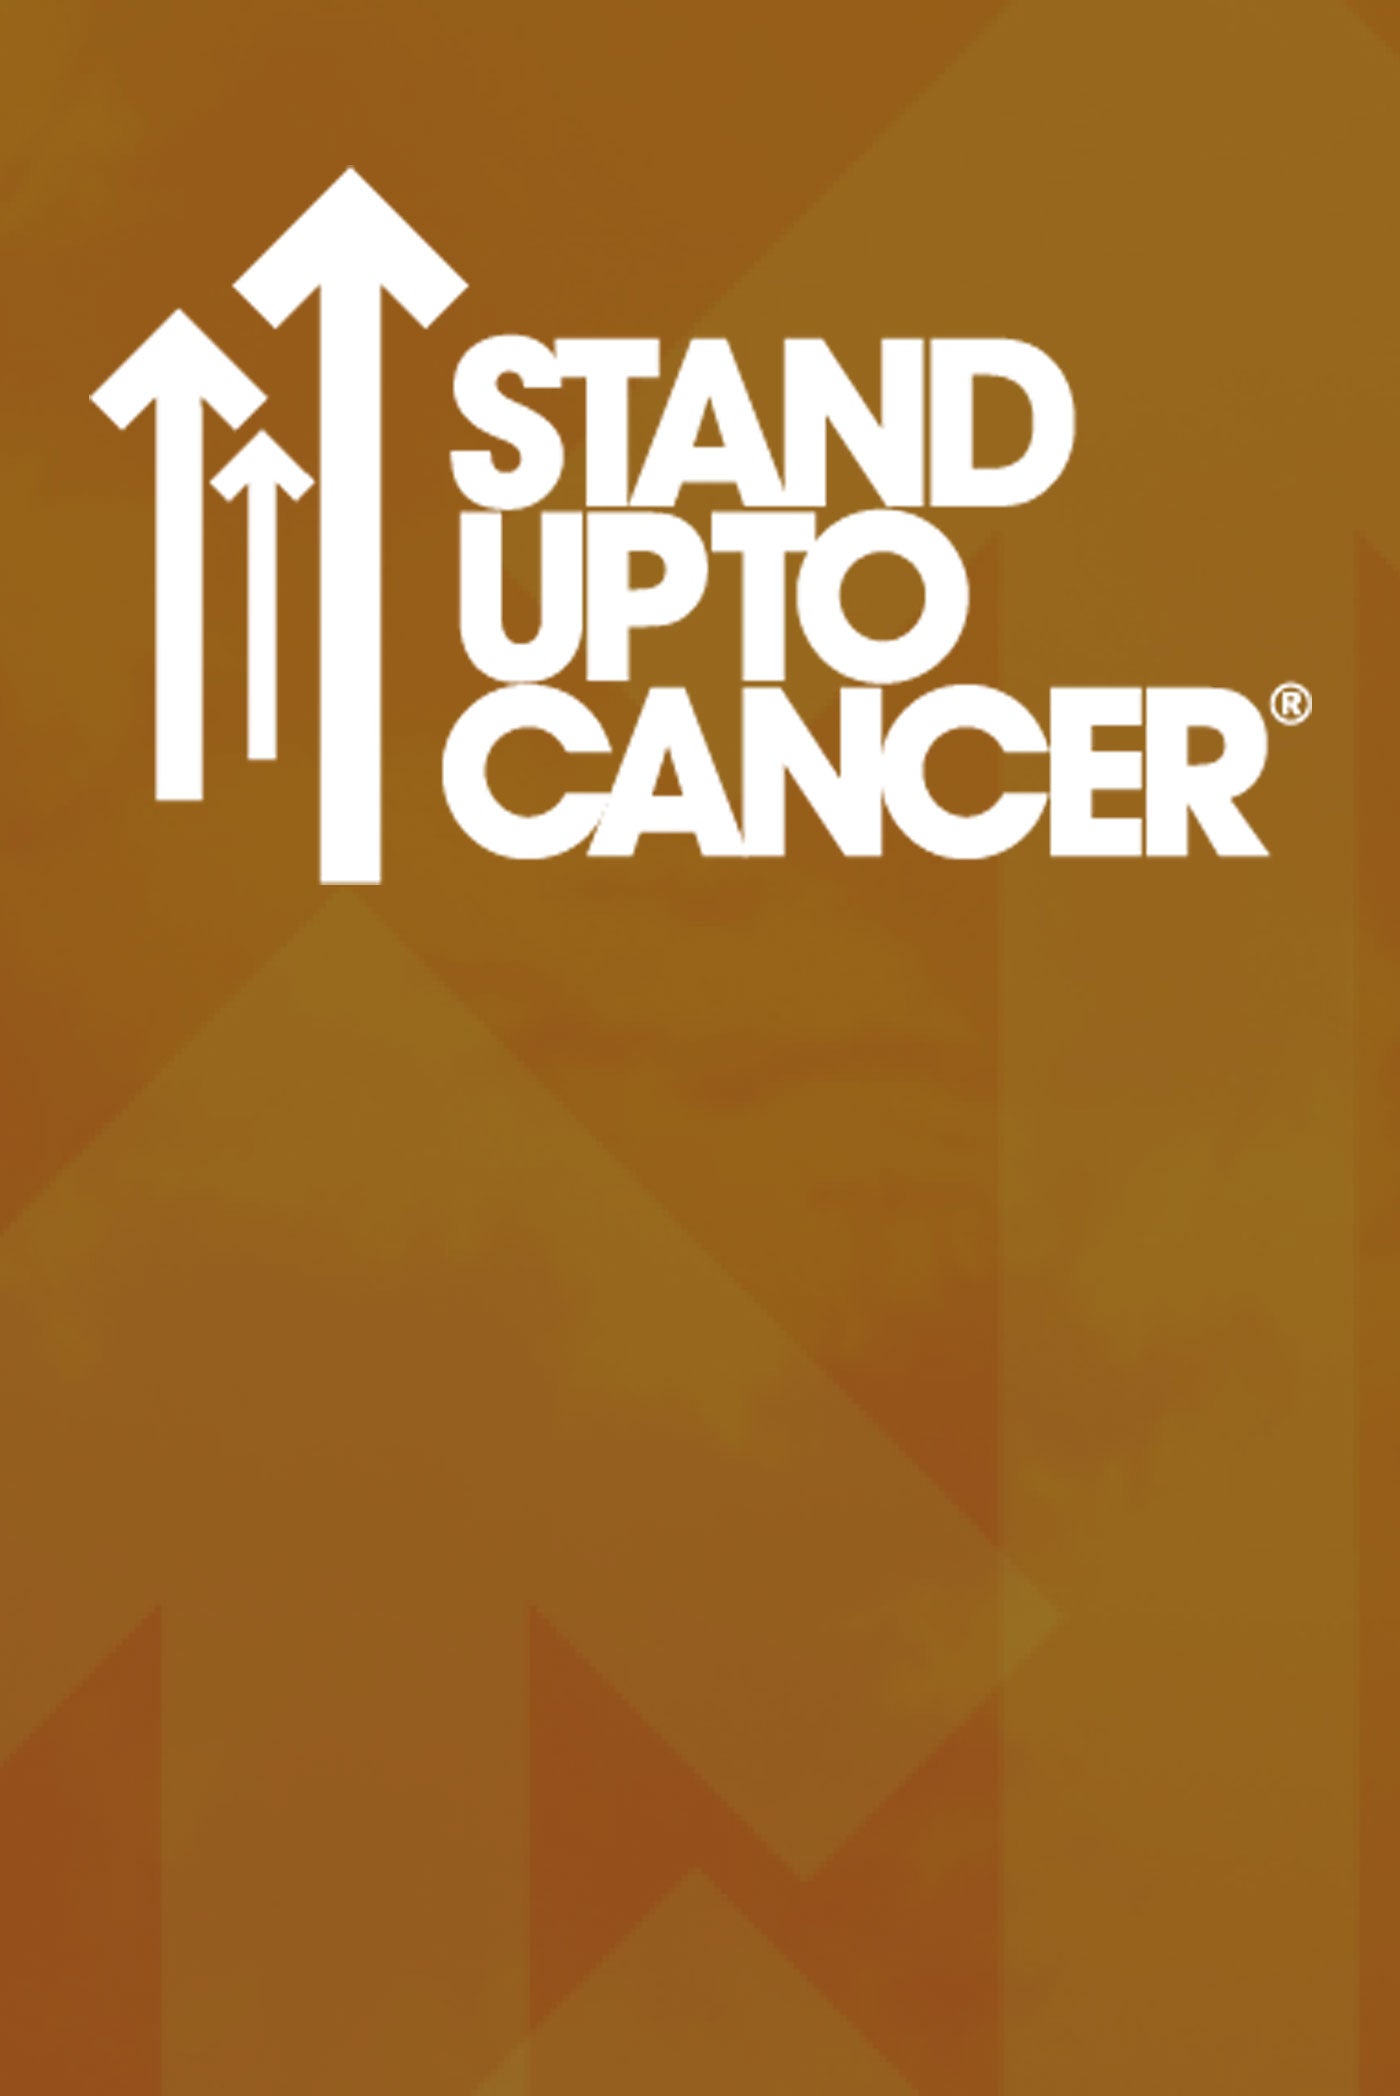 The Stand Up To Cancer logo on an orange background.